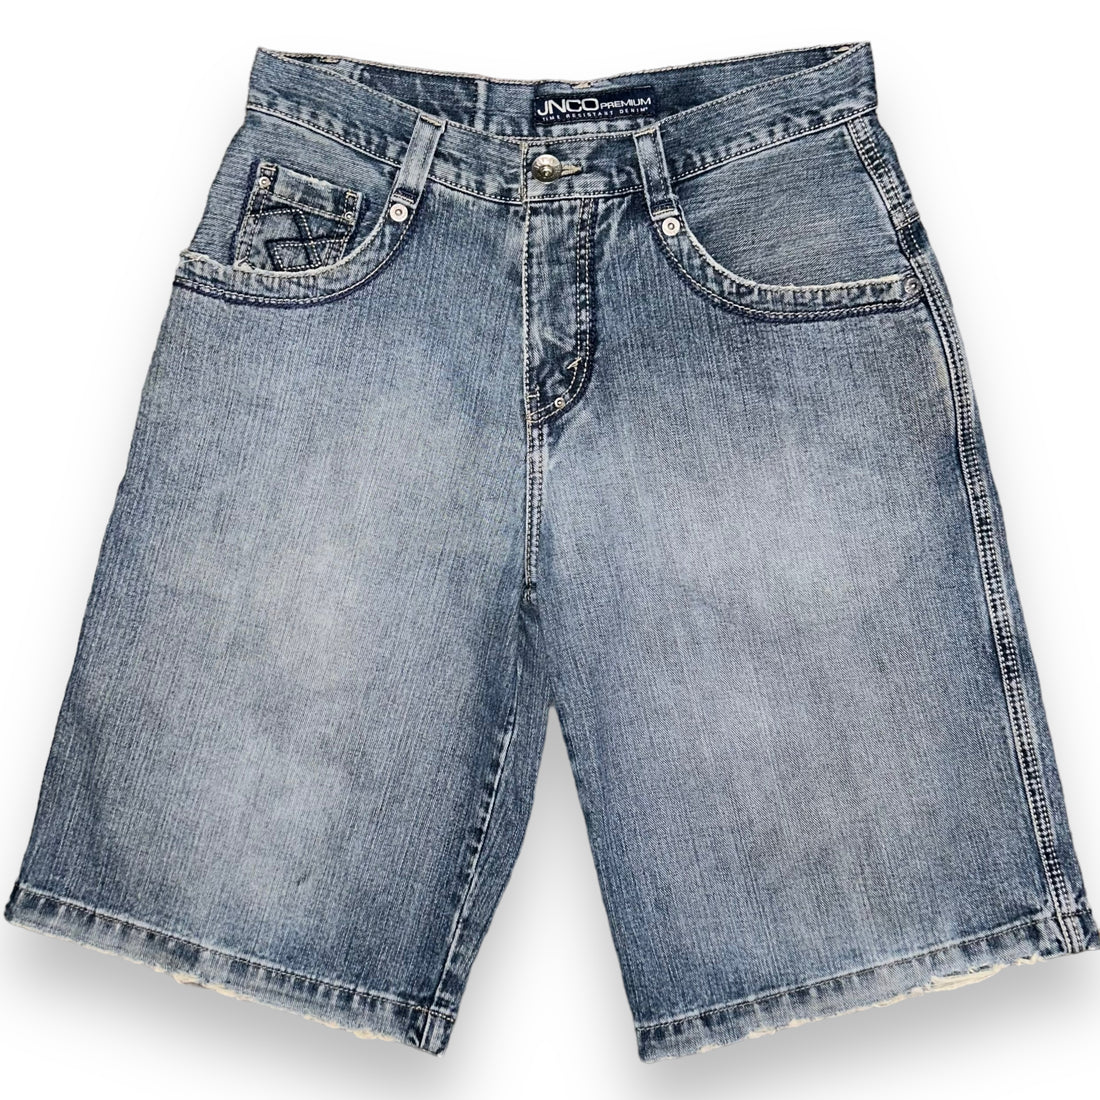 Baggy Shorts JNCO (32 US M)